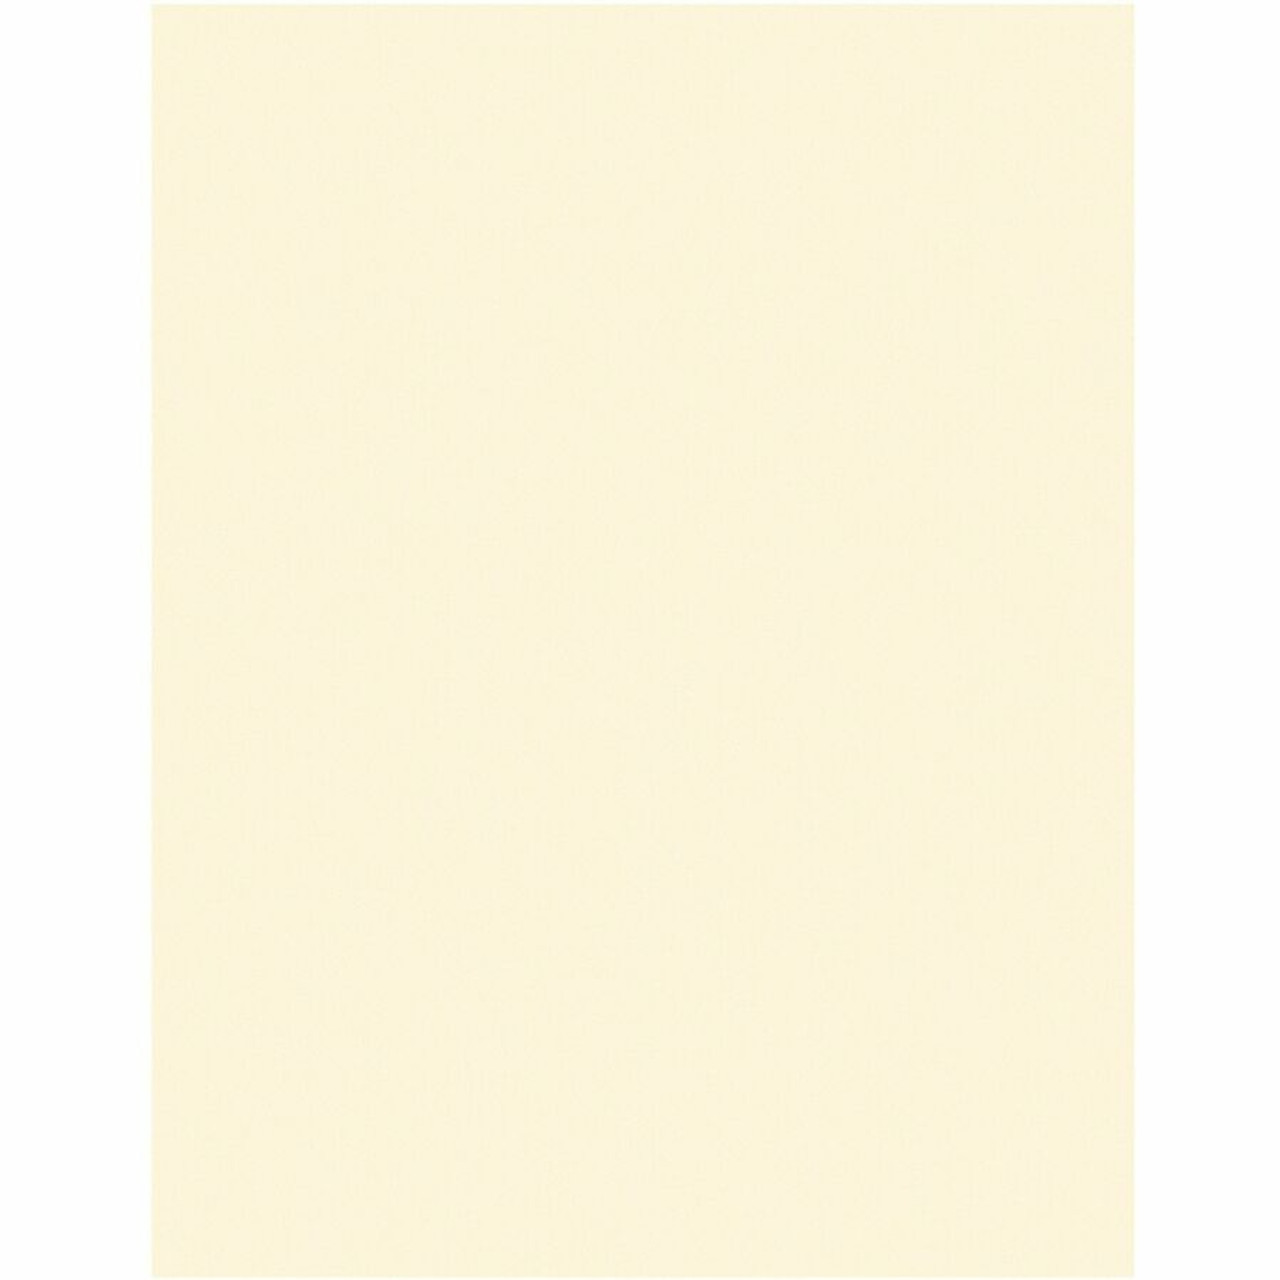 Pacon Array Card Stock 65 lbs. Letter White 100 Sheets/Pack